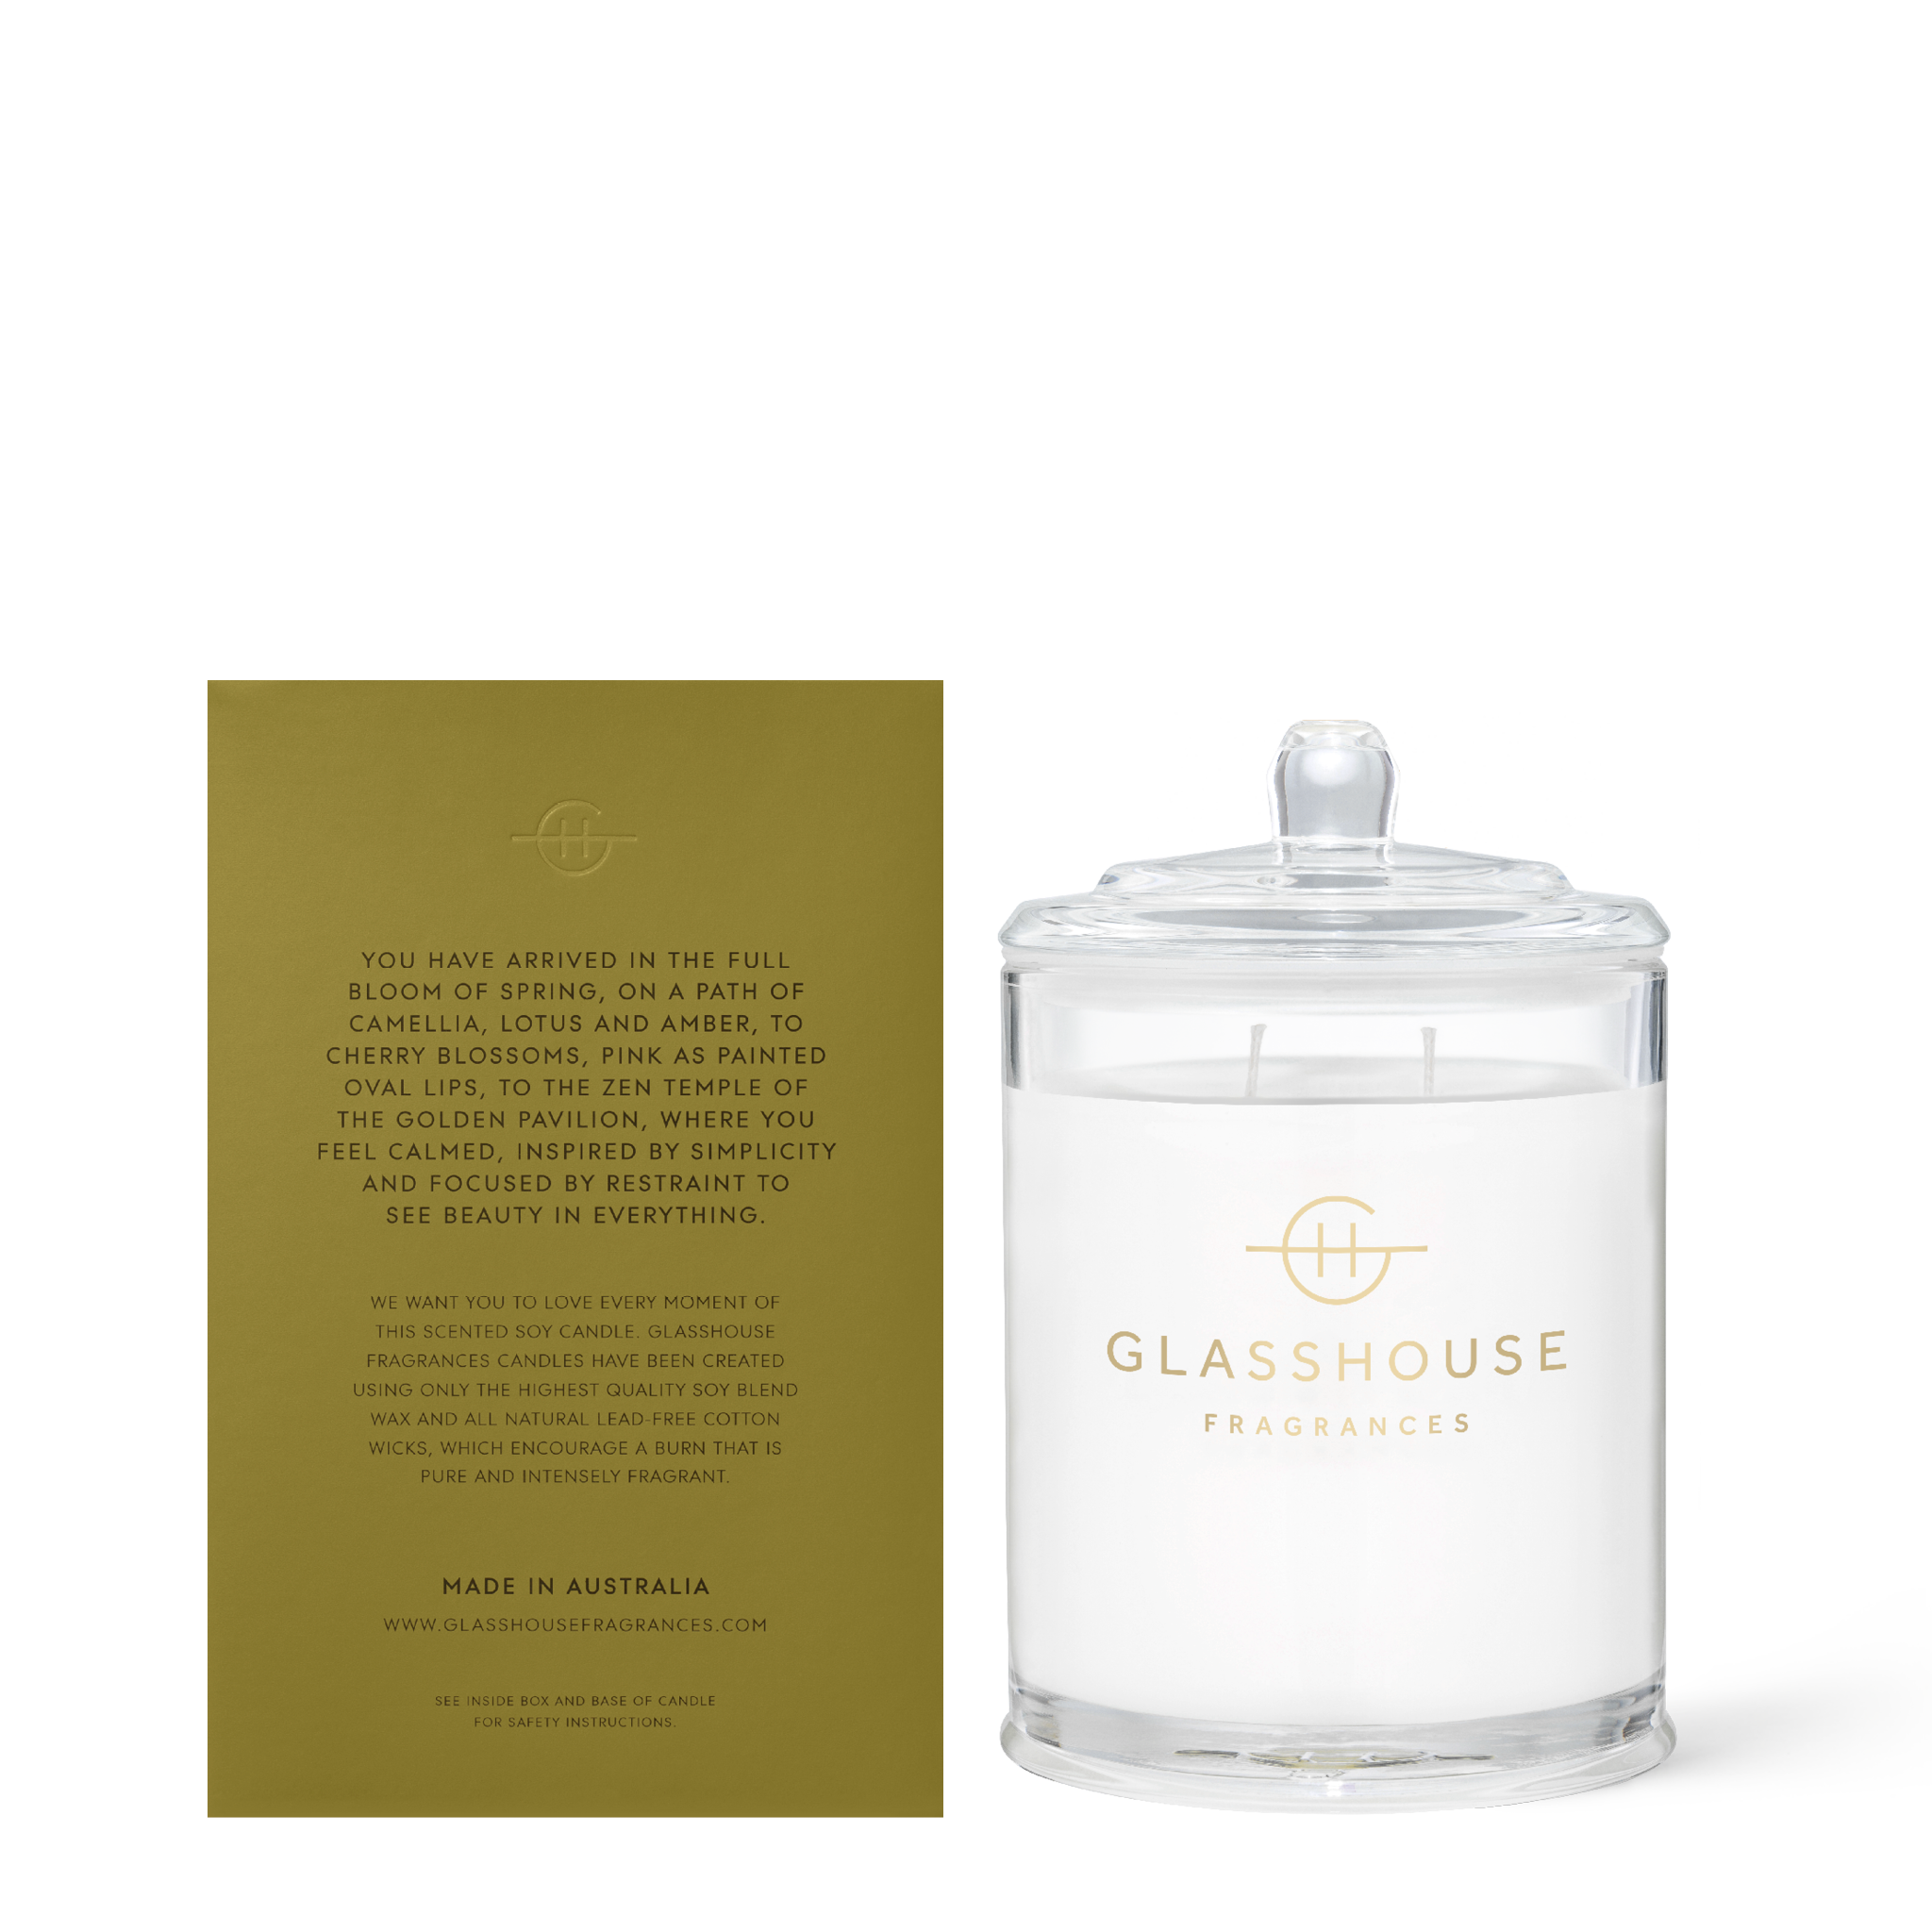 Glasshouse Fragrances Kyoto in Bloom Camellia and Lotus 380g Soy Candle with box - back of product shot